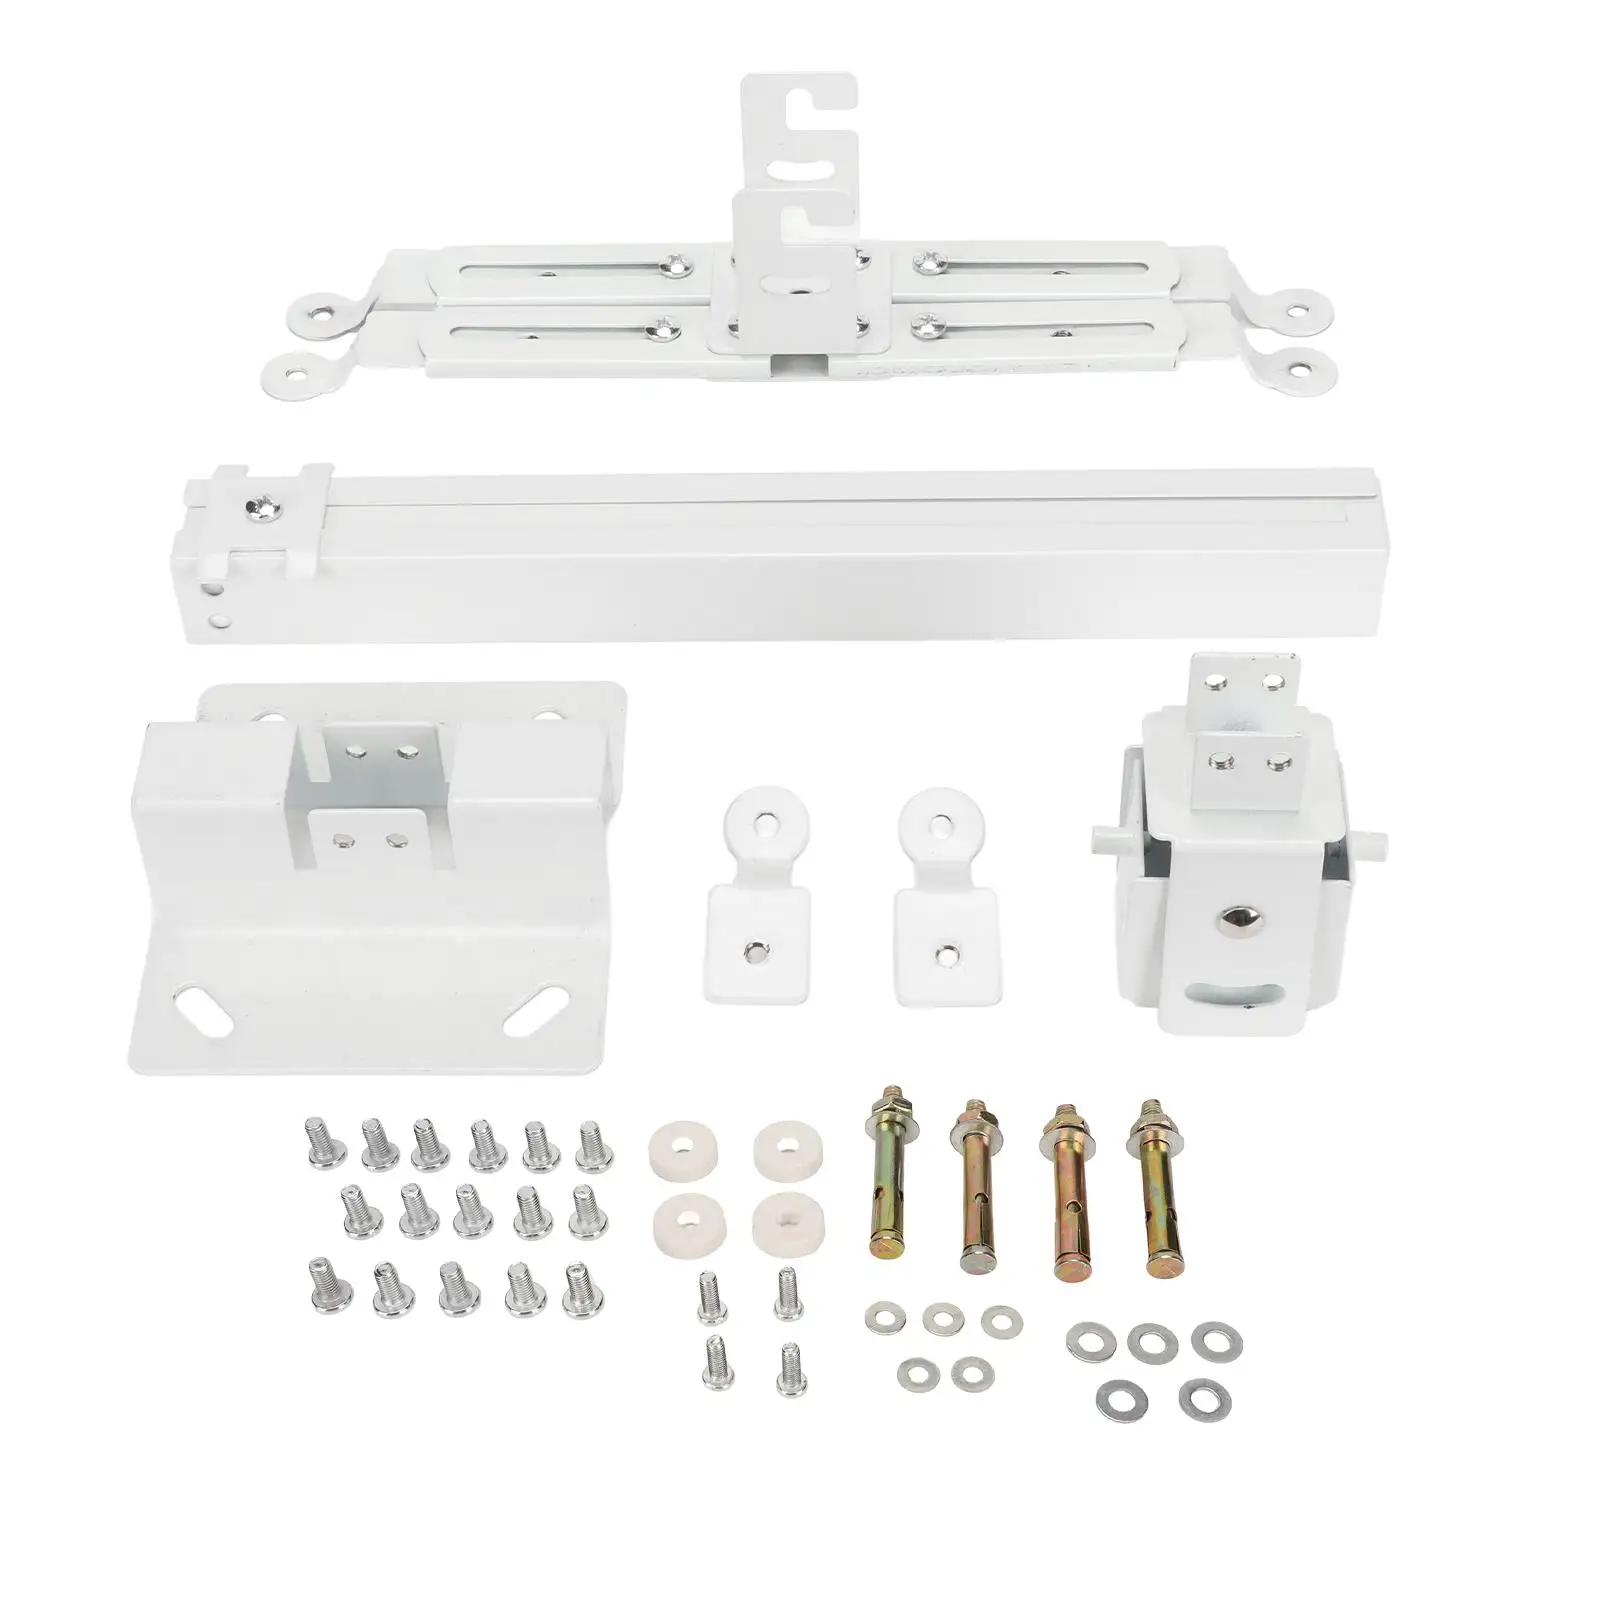 

Adjustable White Projector Ceiling Mount, 25kg Load Capacity, for 4-Hole Projectors